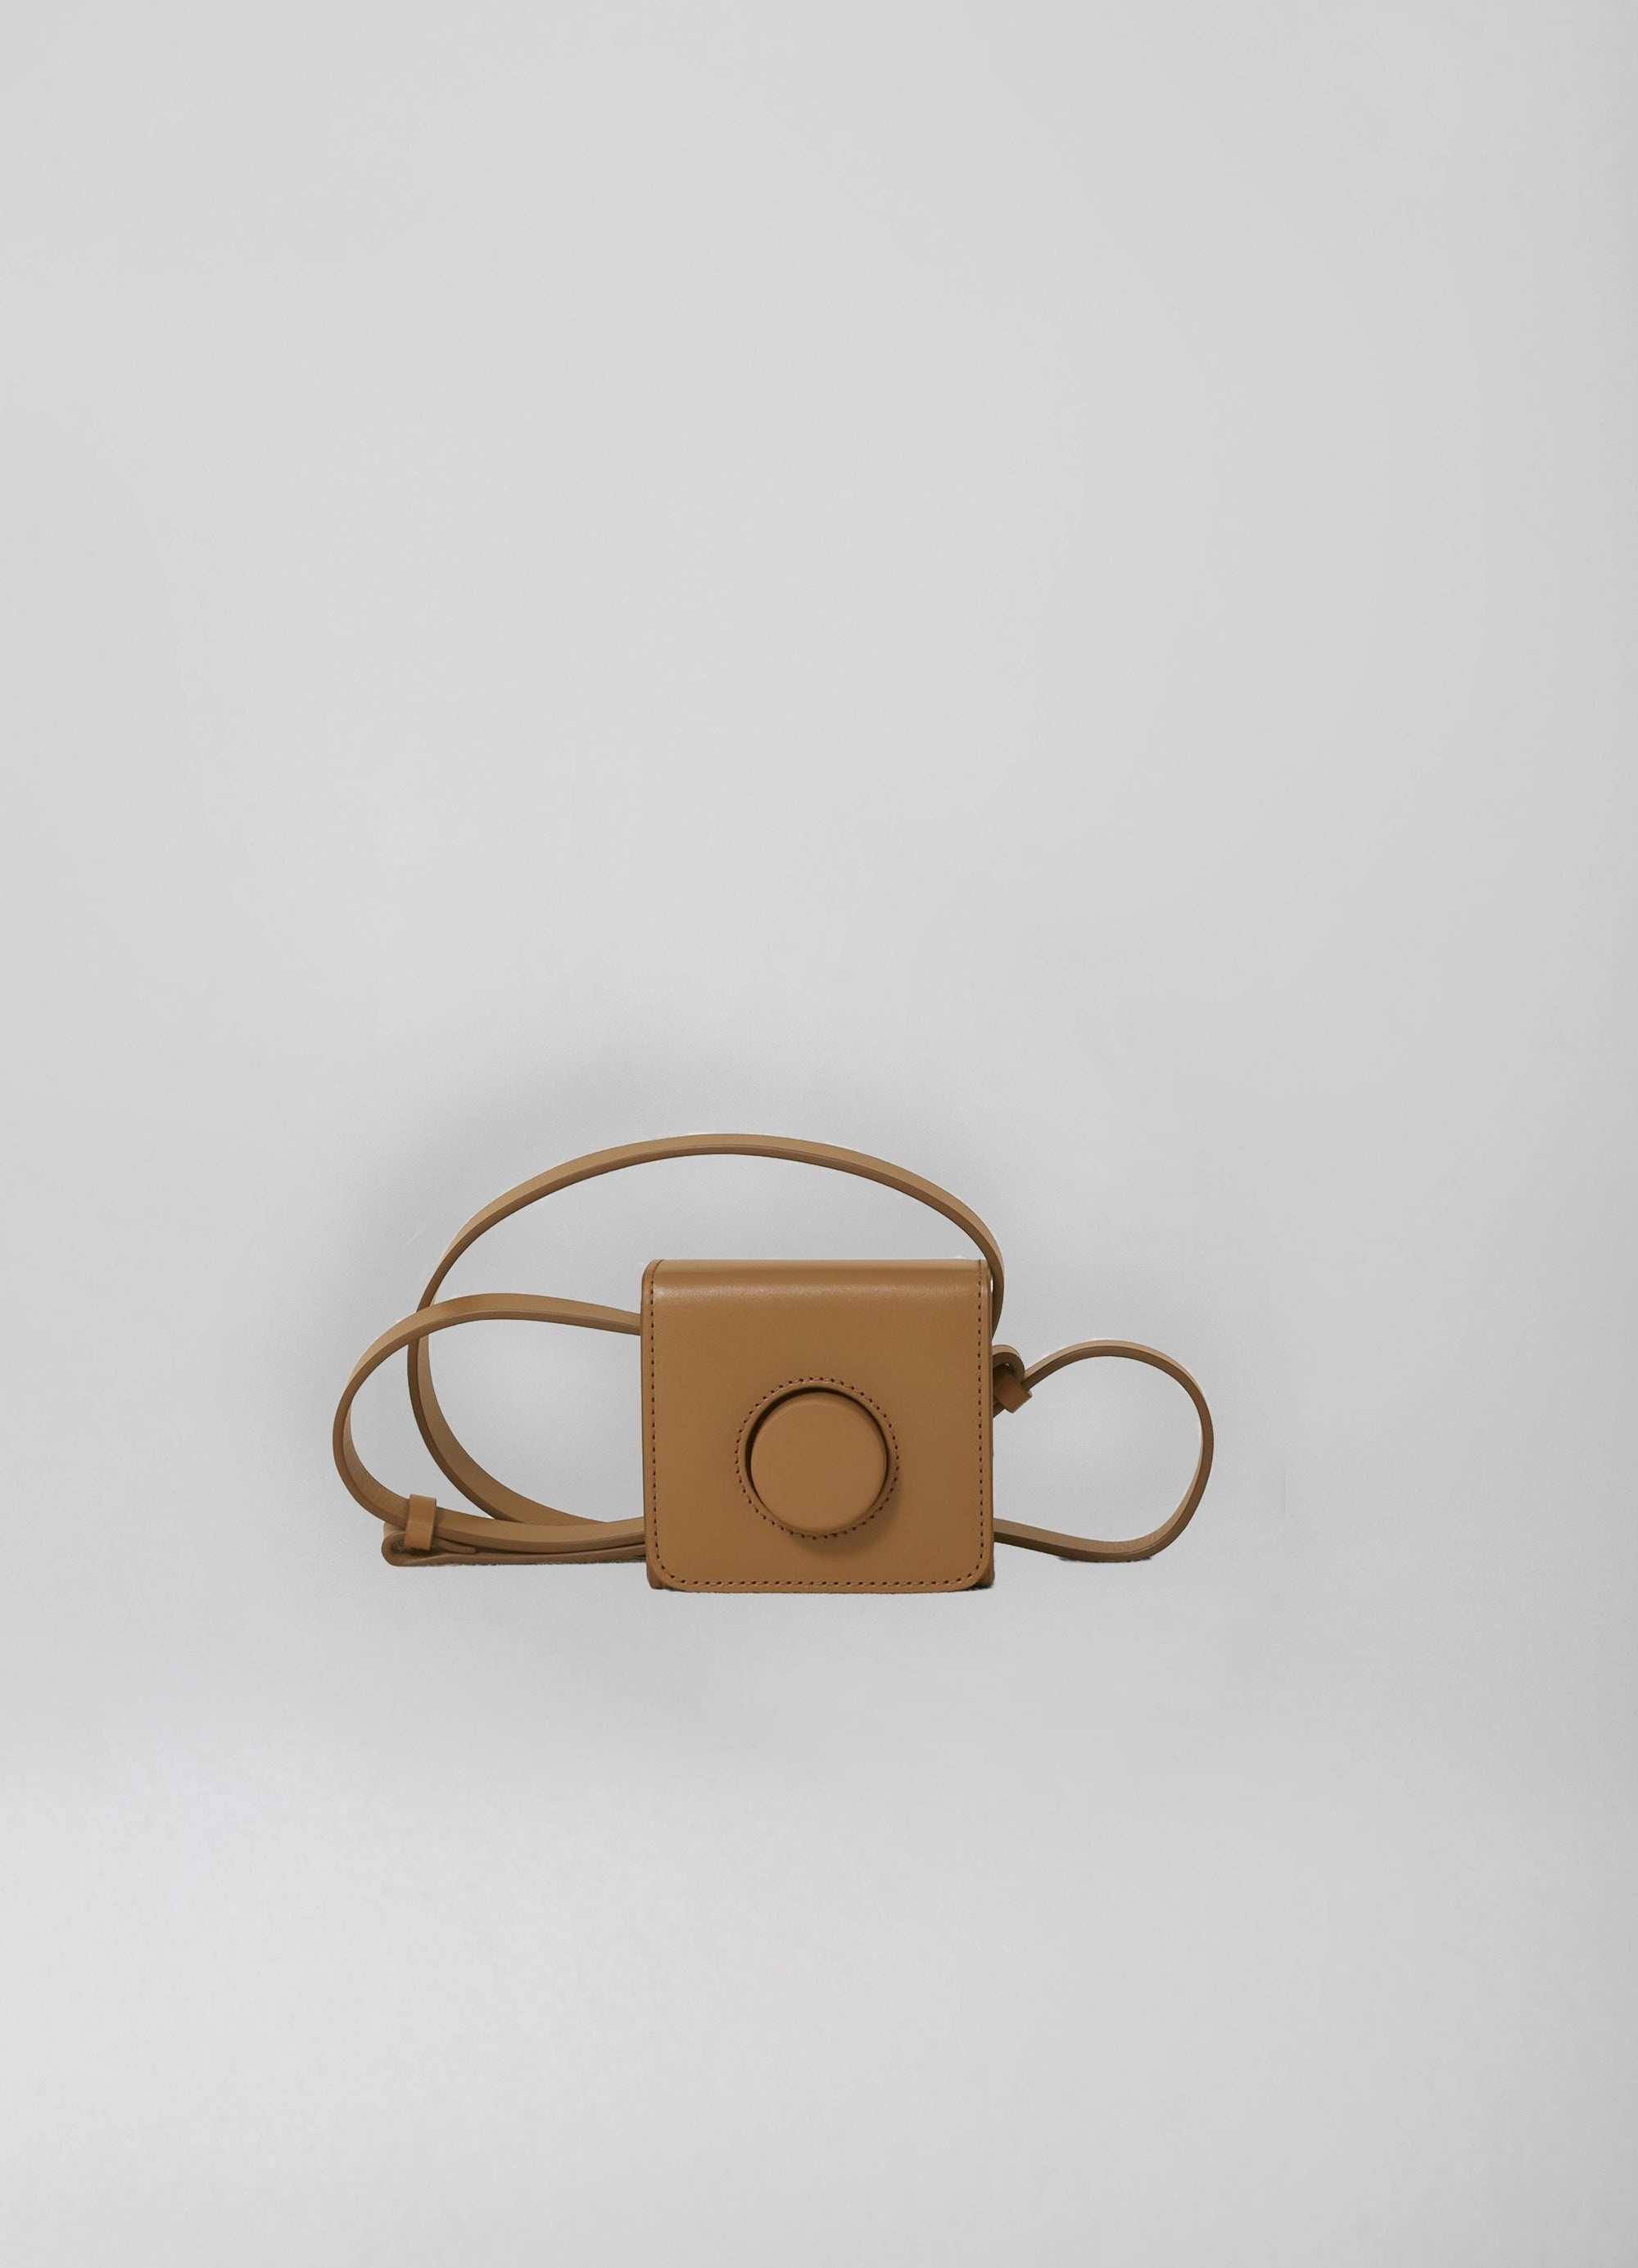 MINI CAMERA BAG / ONLINE EXCLUSIVE
VEGETABLE-TANNED LEATHER - 1